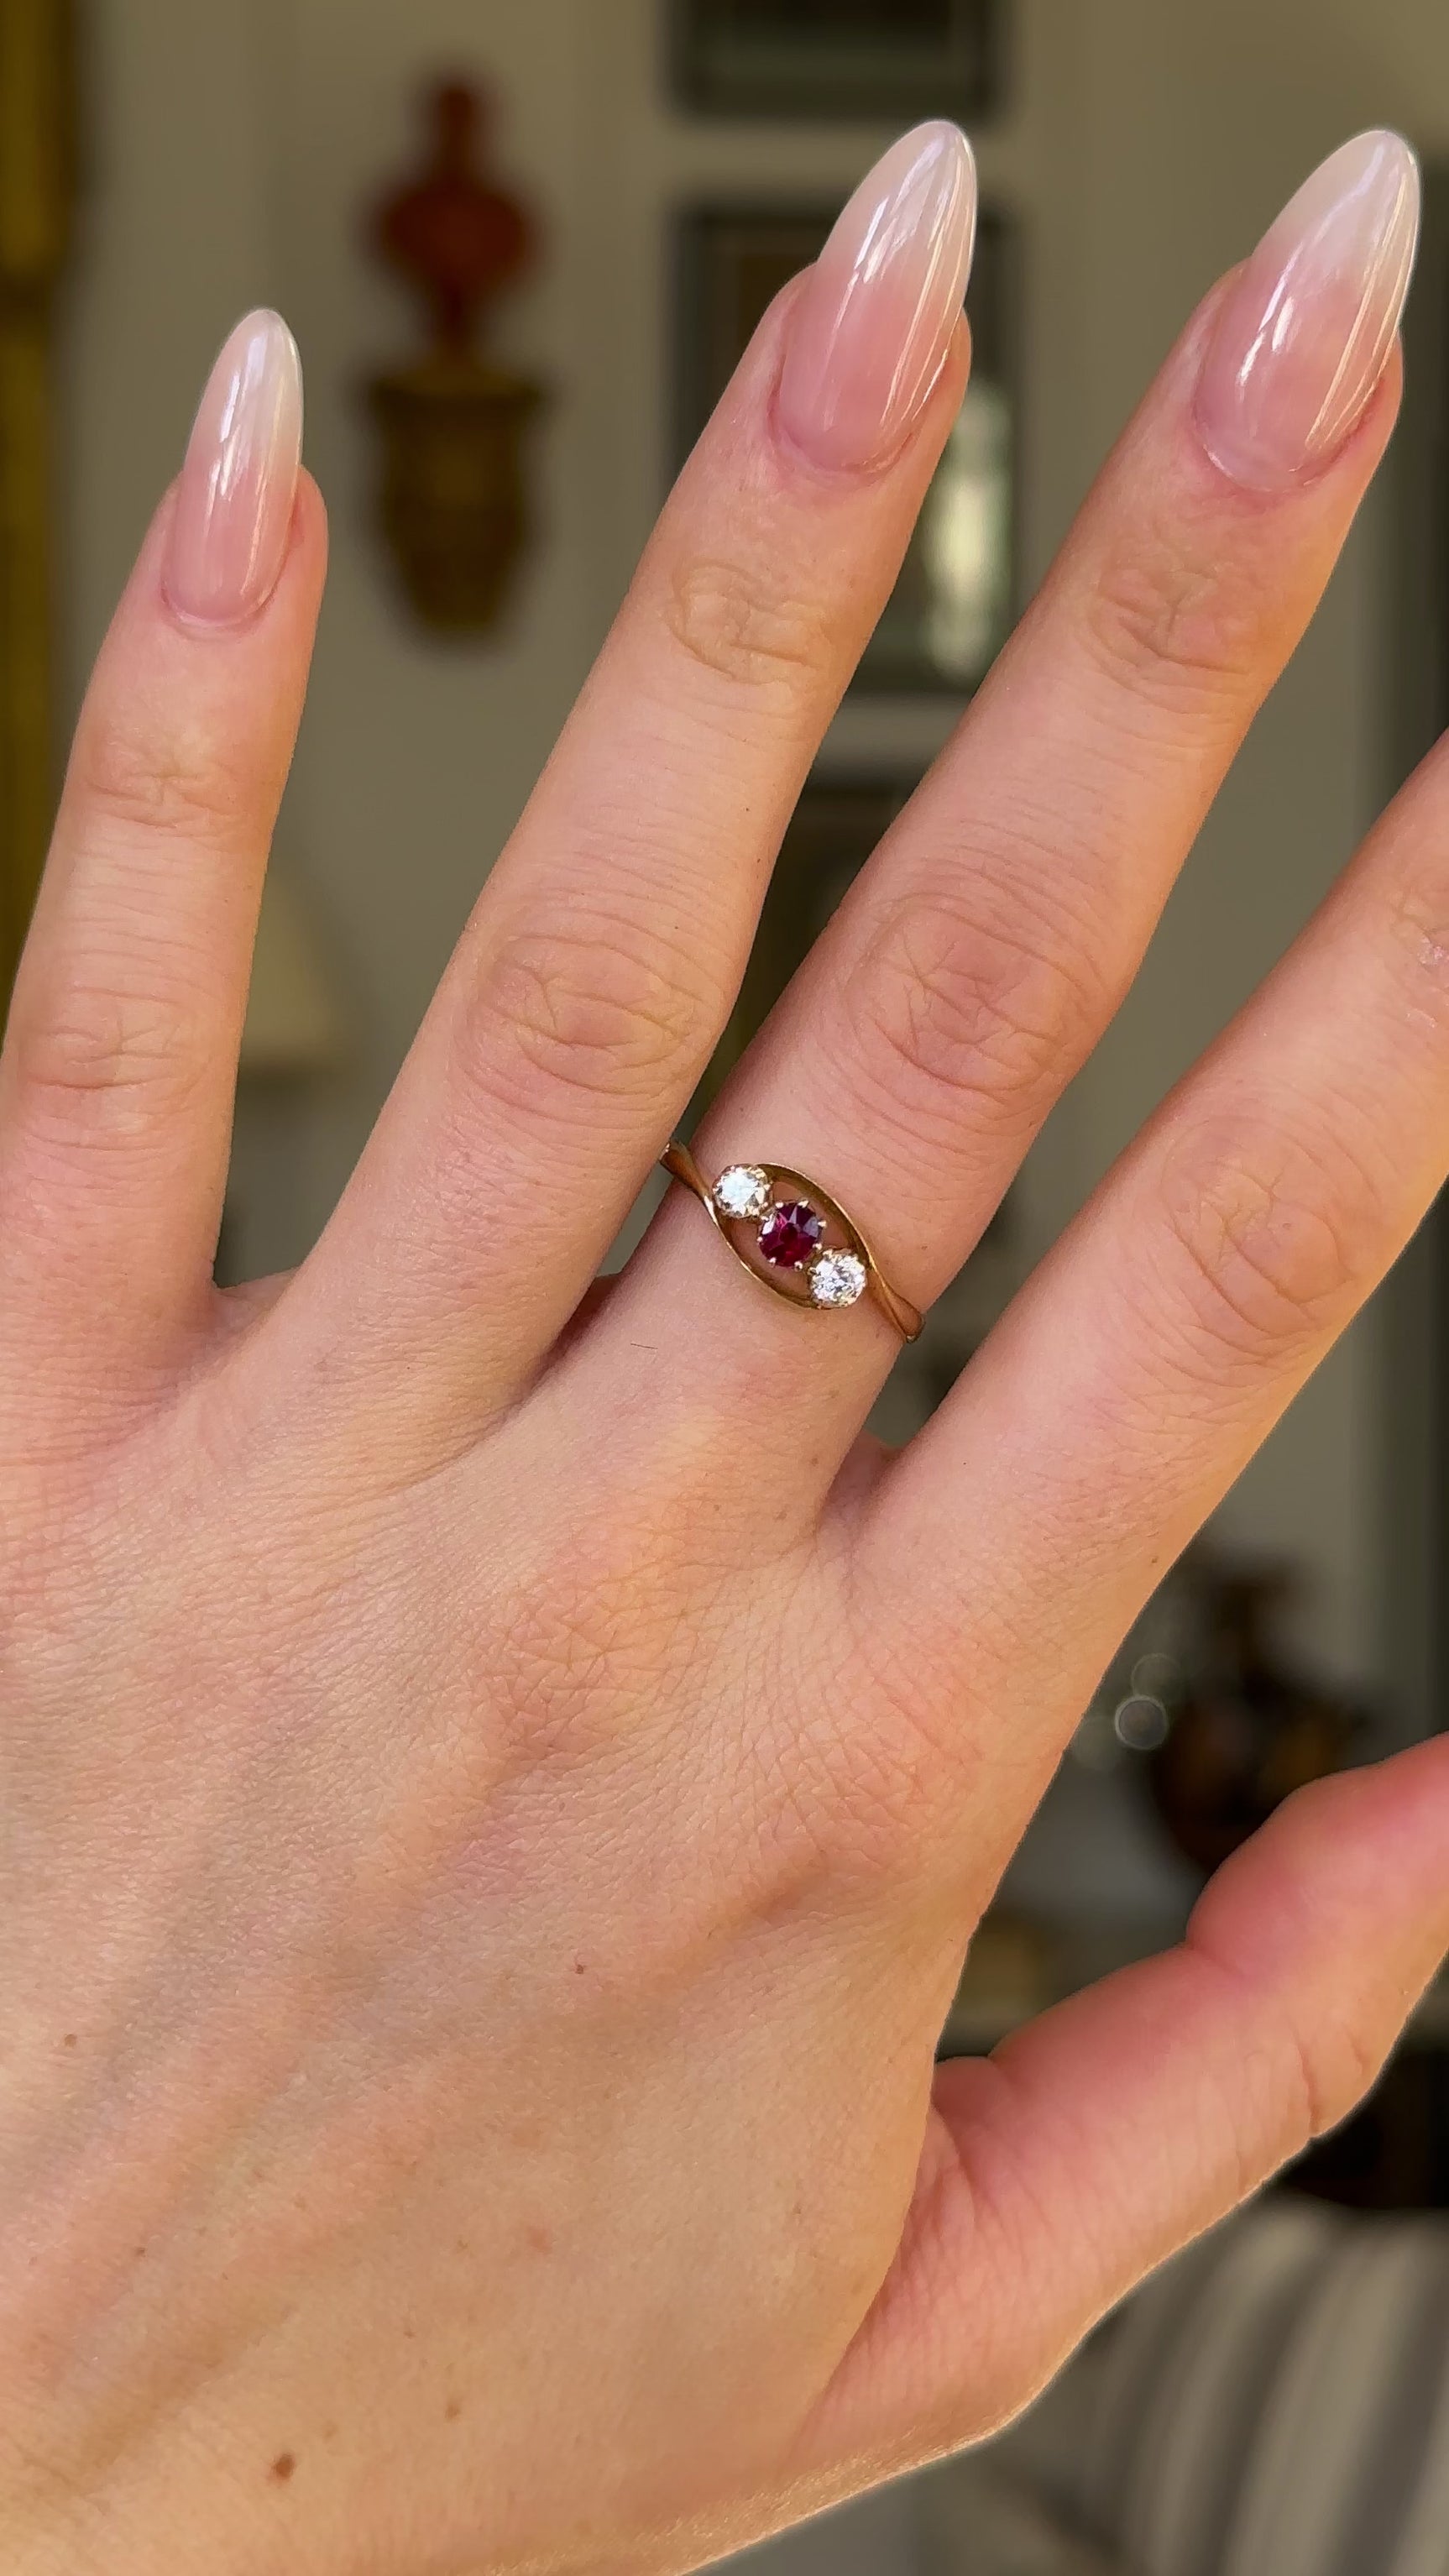 Antique, Three-Stone Ruby and Diamond Engagement Ring, 18ct Yellow Gold worn on hand and rotated to give perspective.